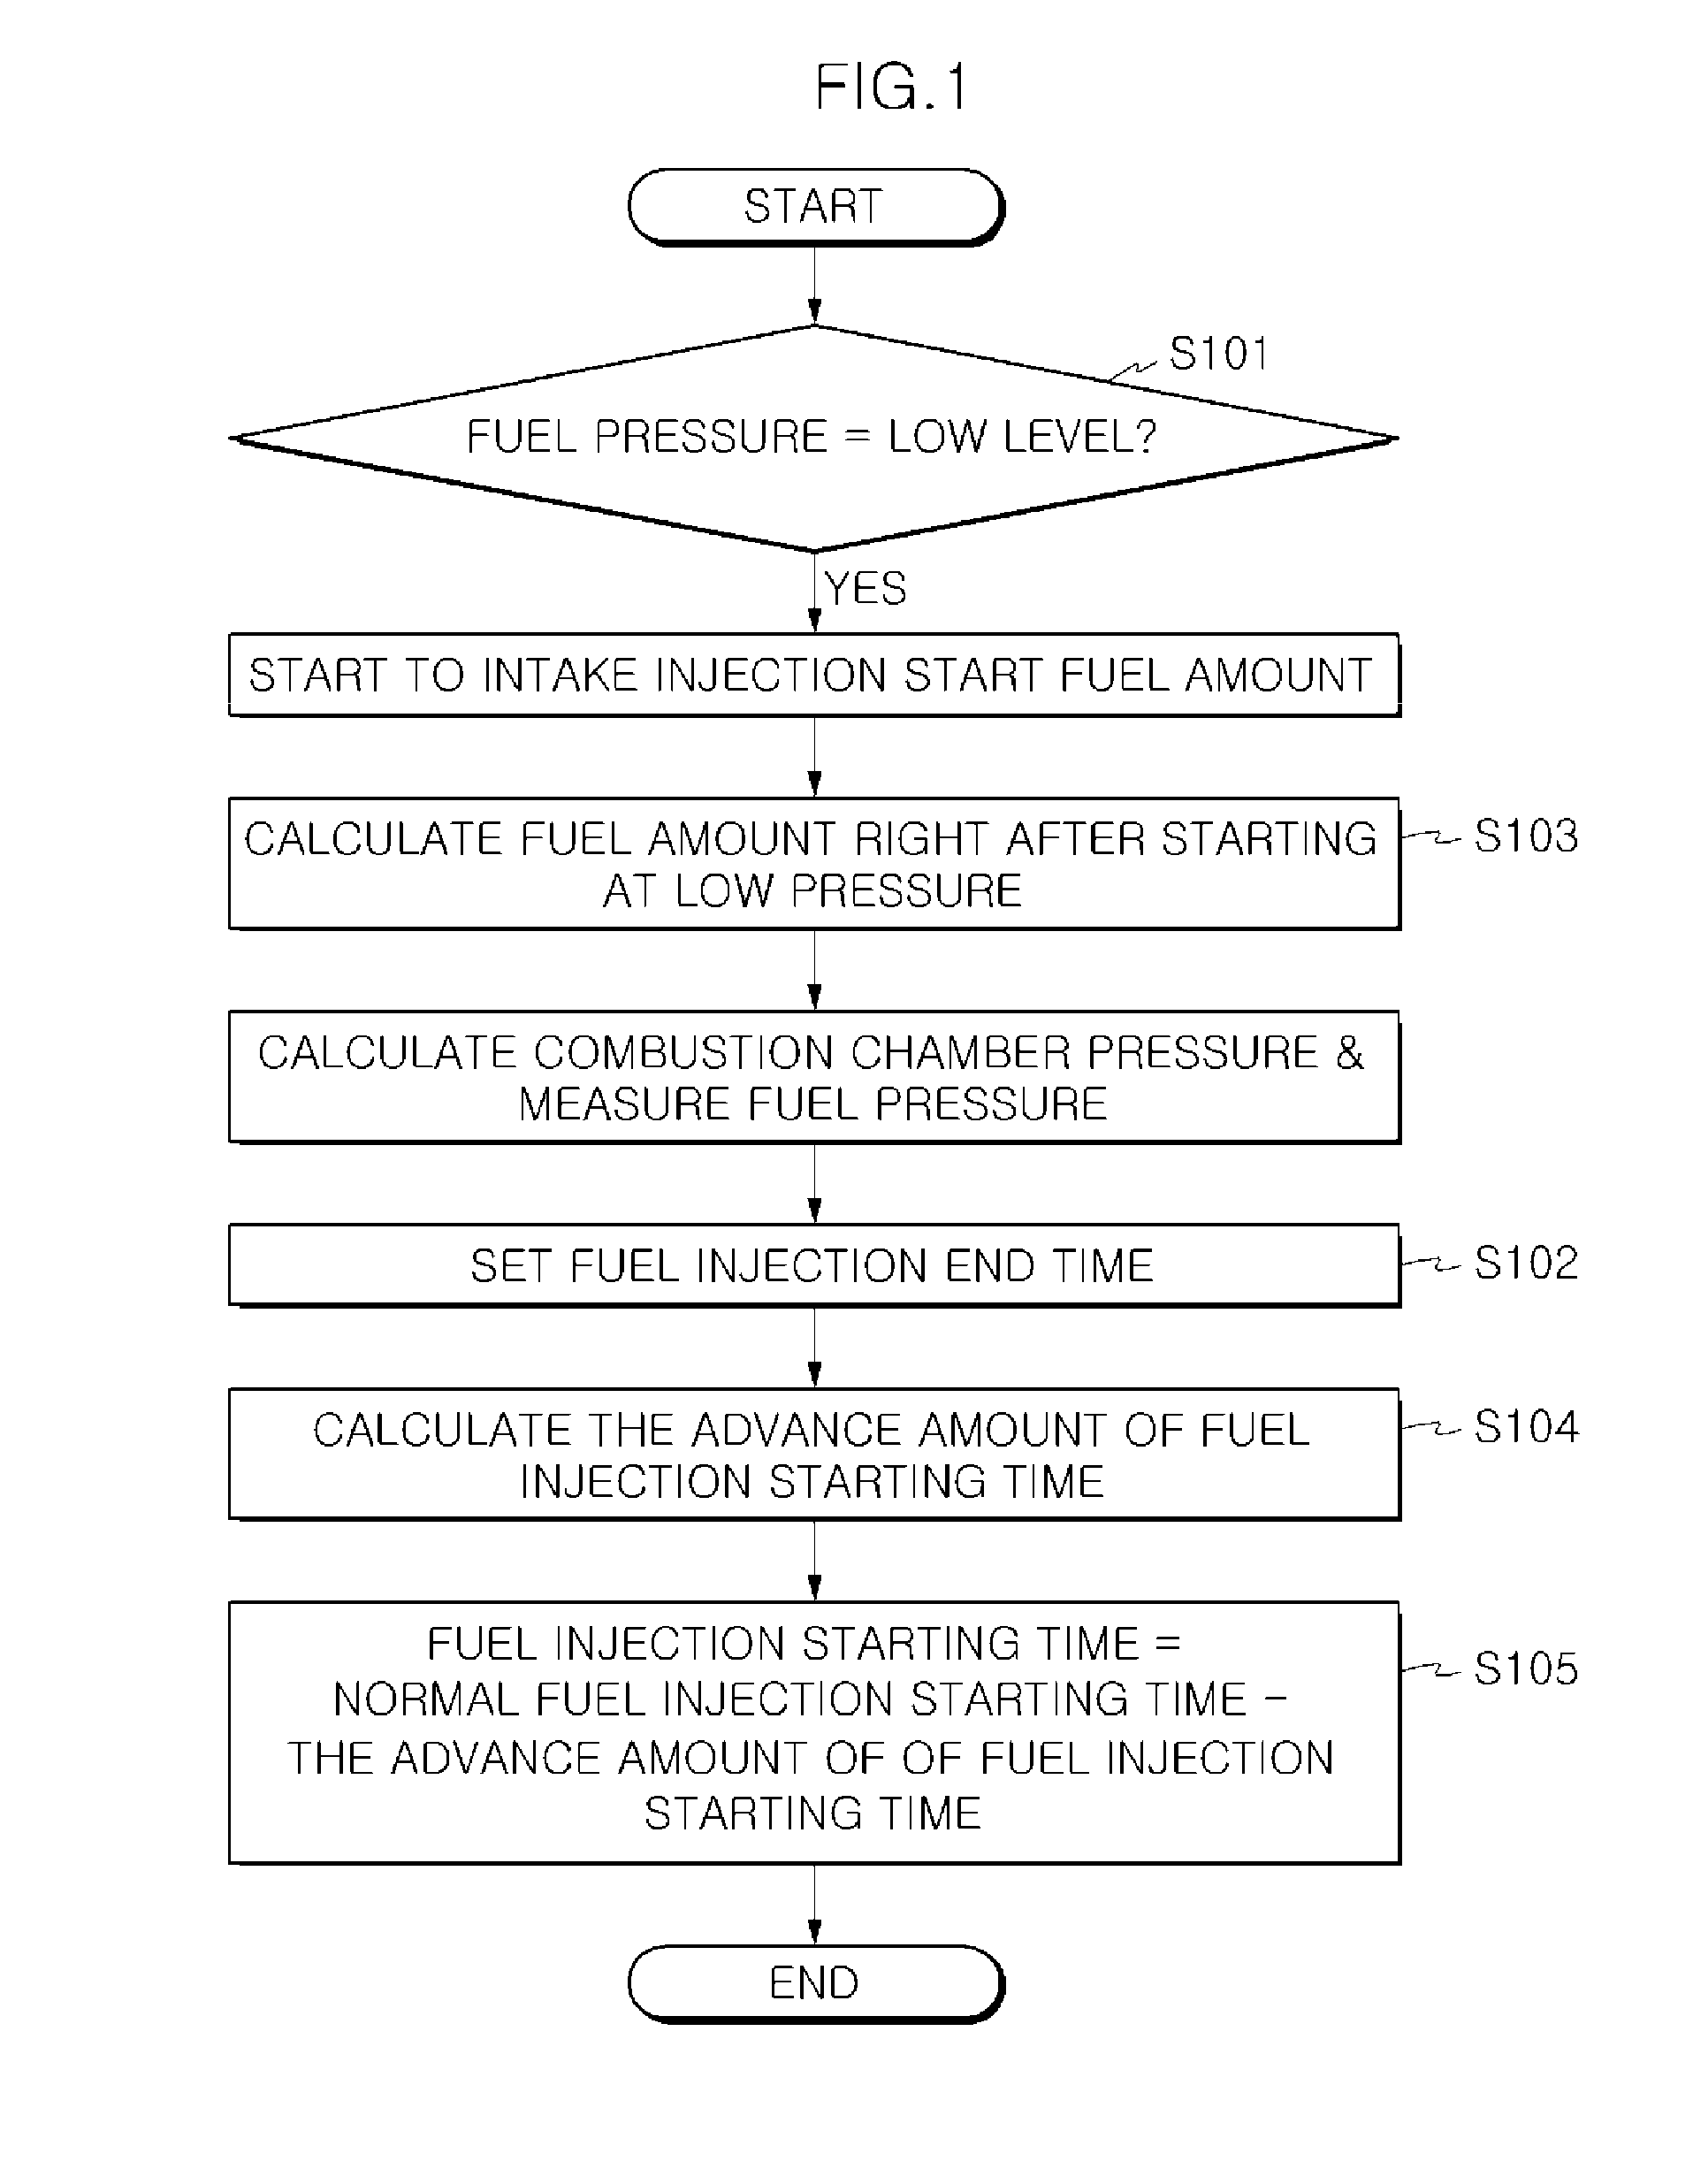 Fuel injection control method for gdi engine